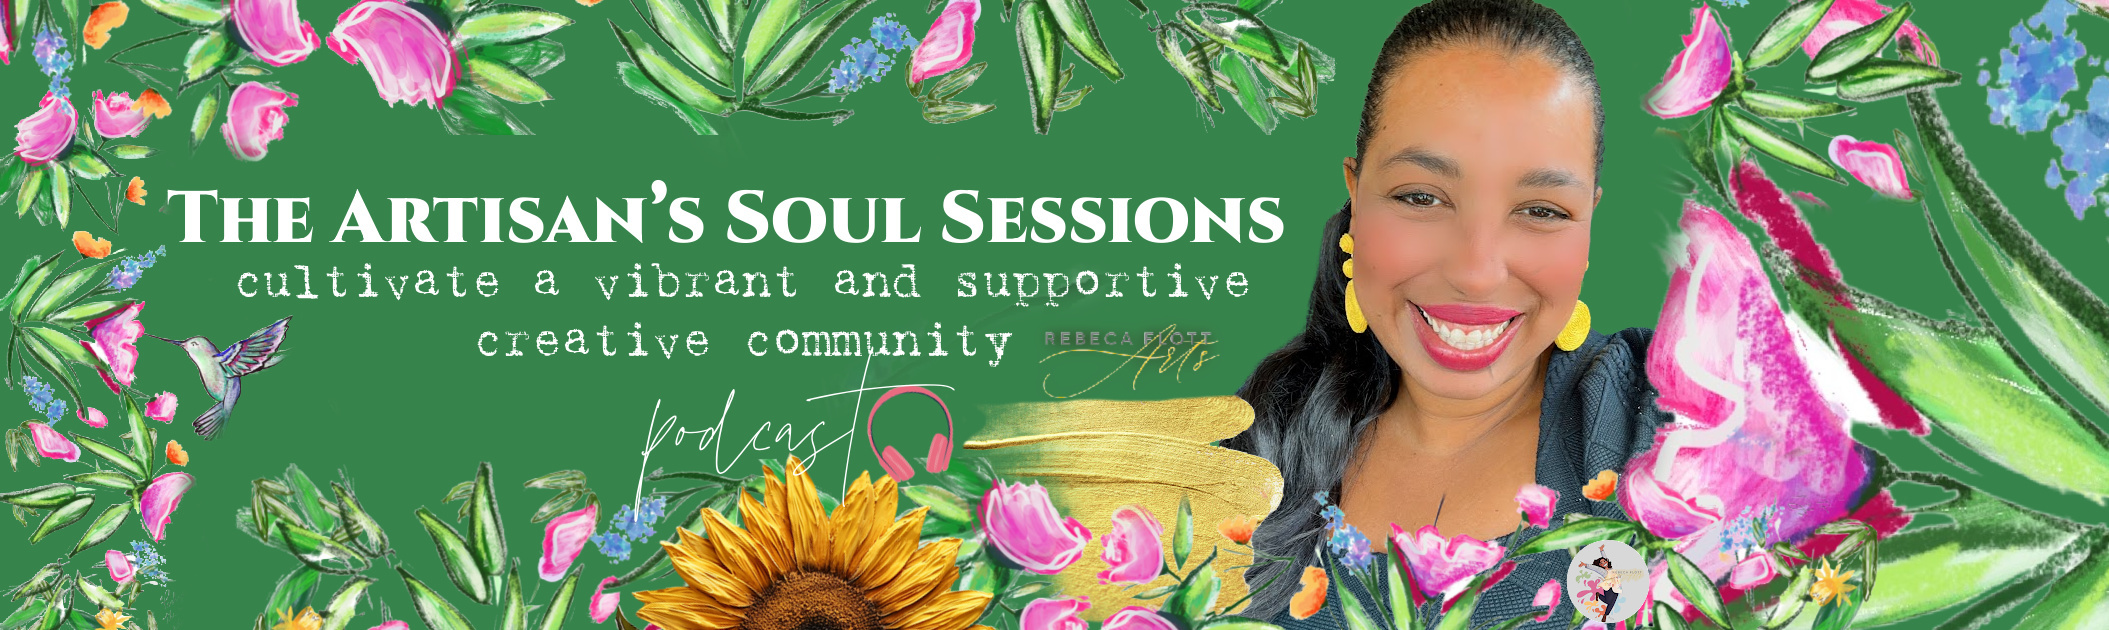 The Artisan’s Soul Sessions